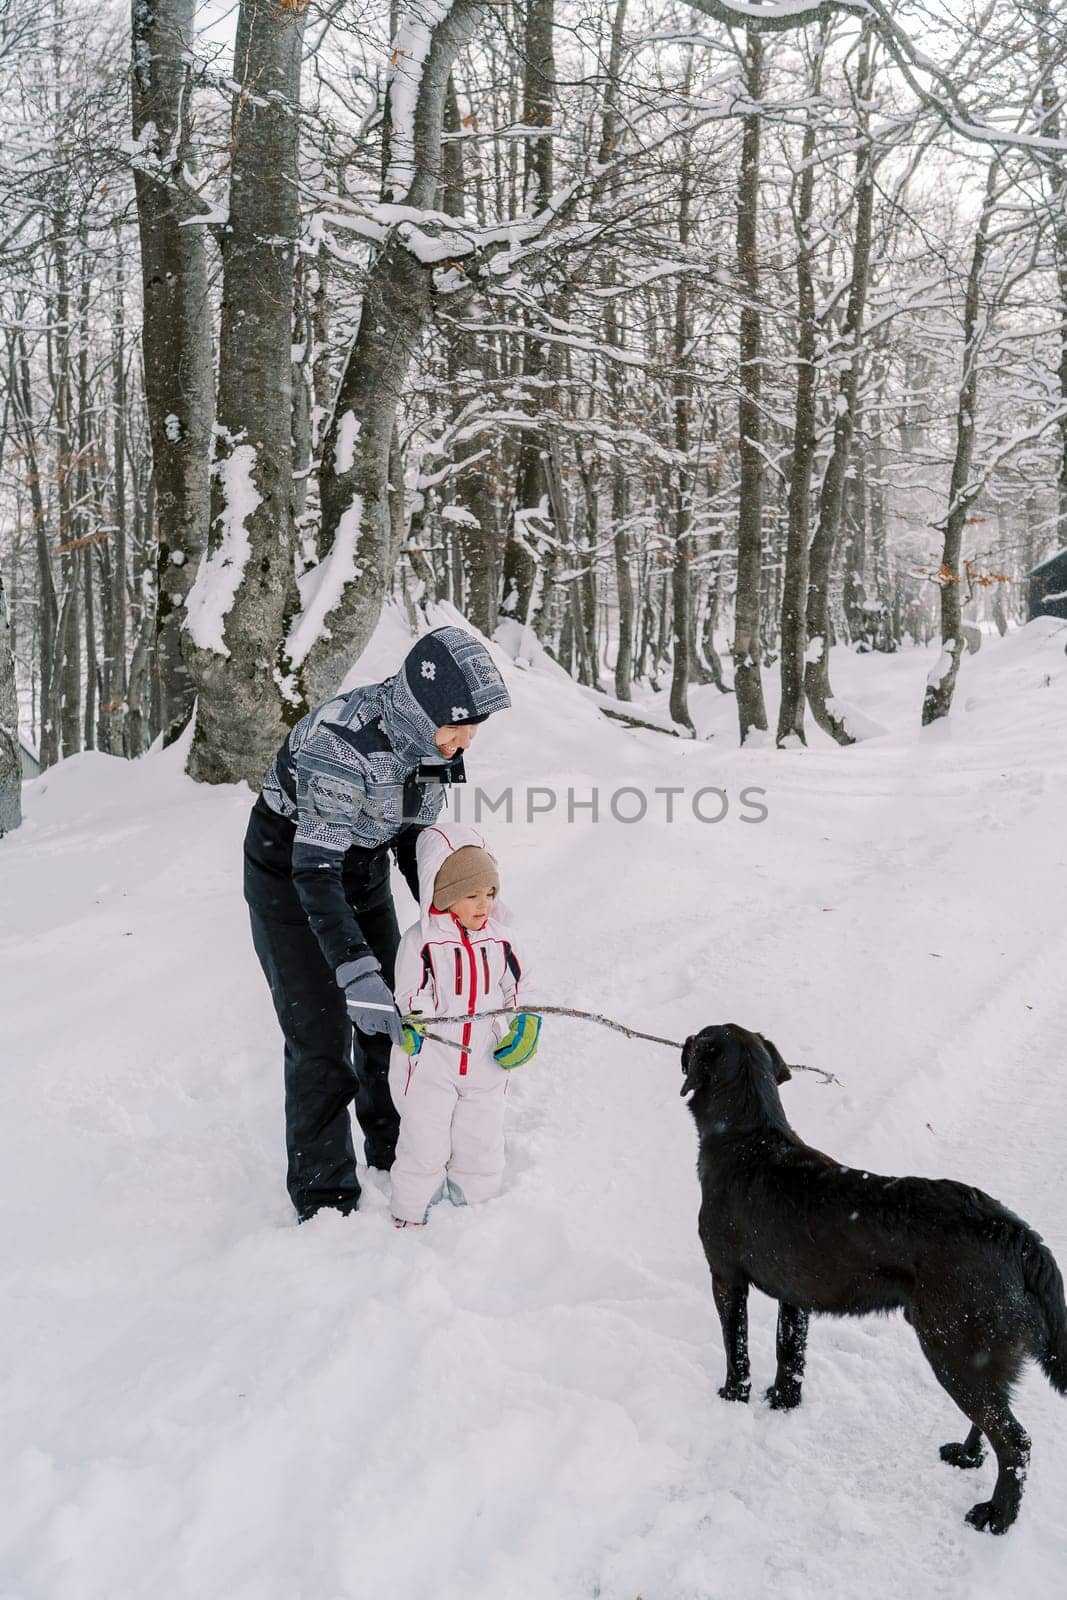 Mom hands out a stick to a black dog while standing with a little girl in a snowy forest by Nadtochiy